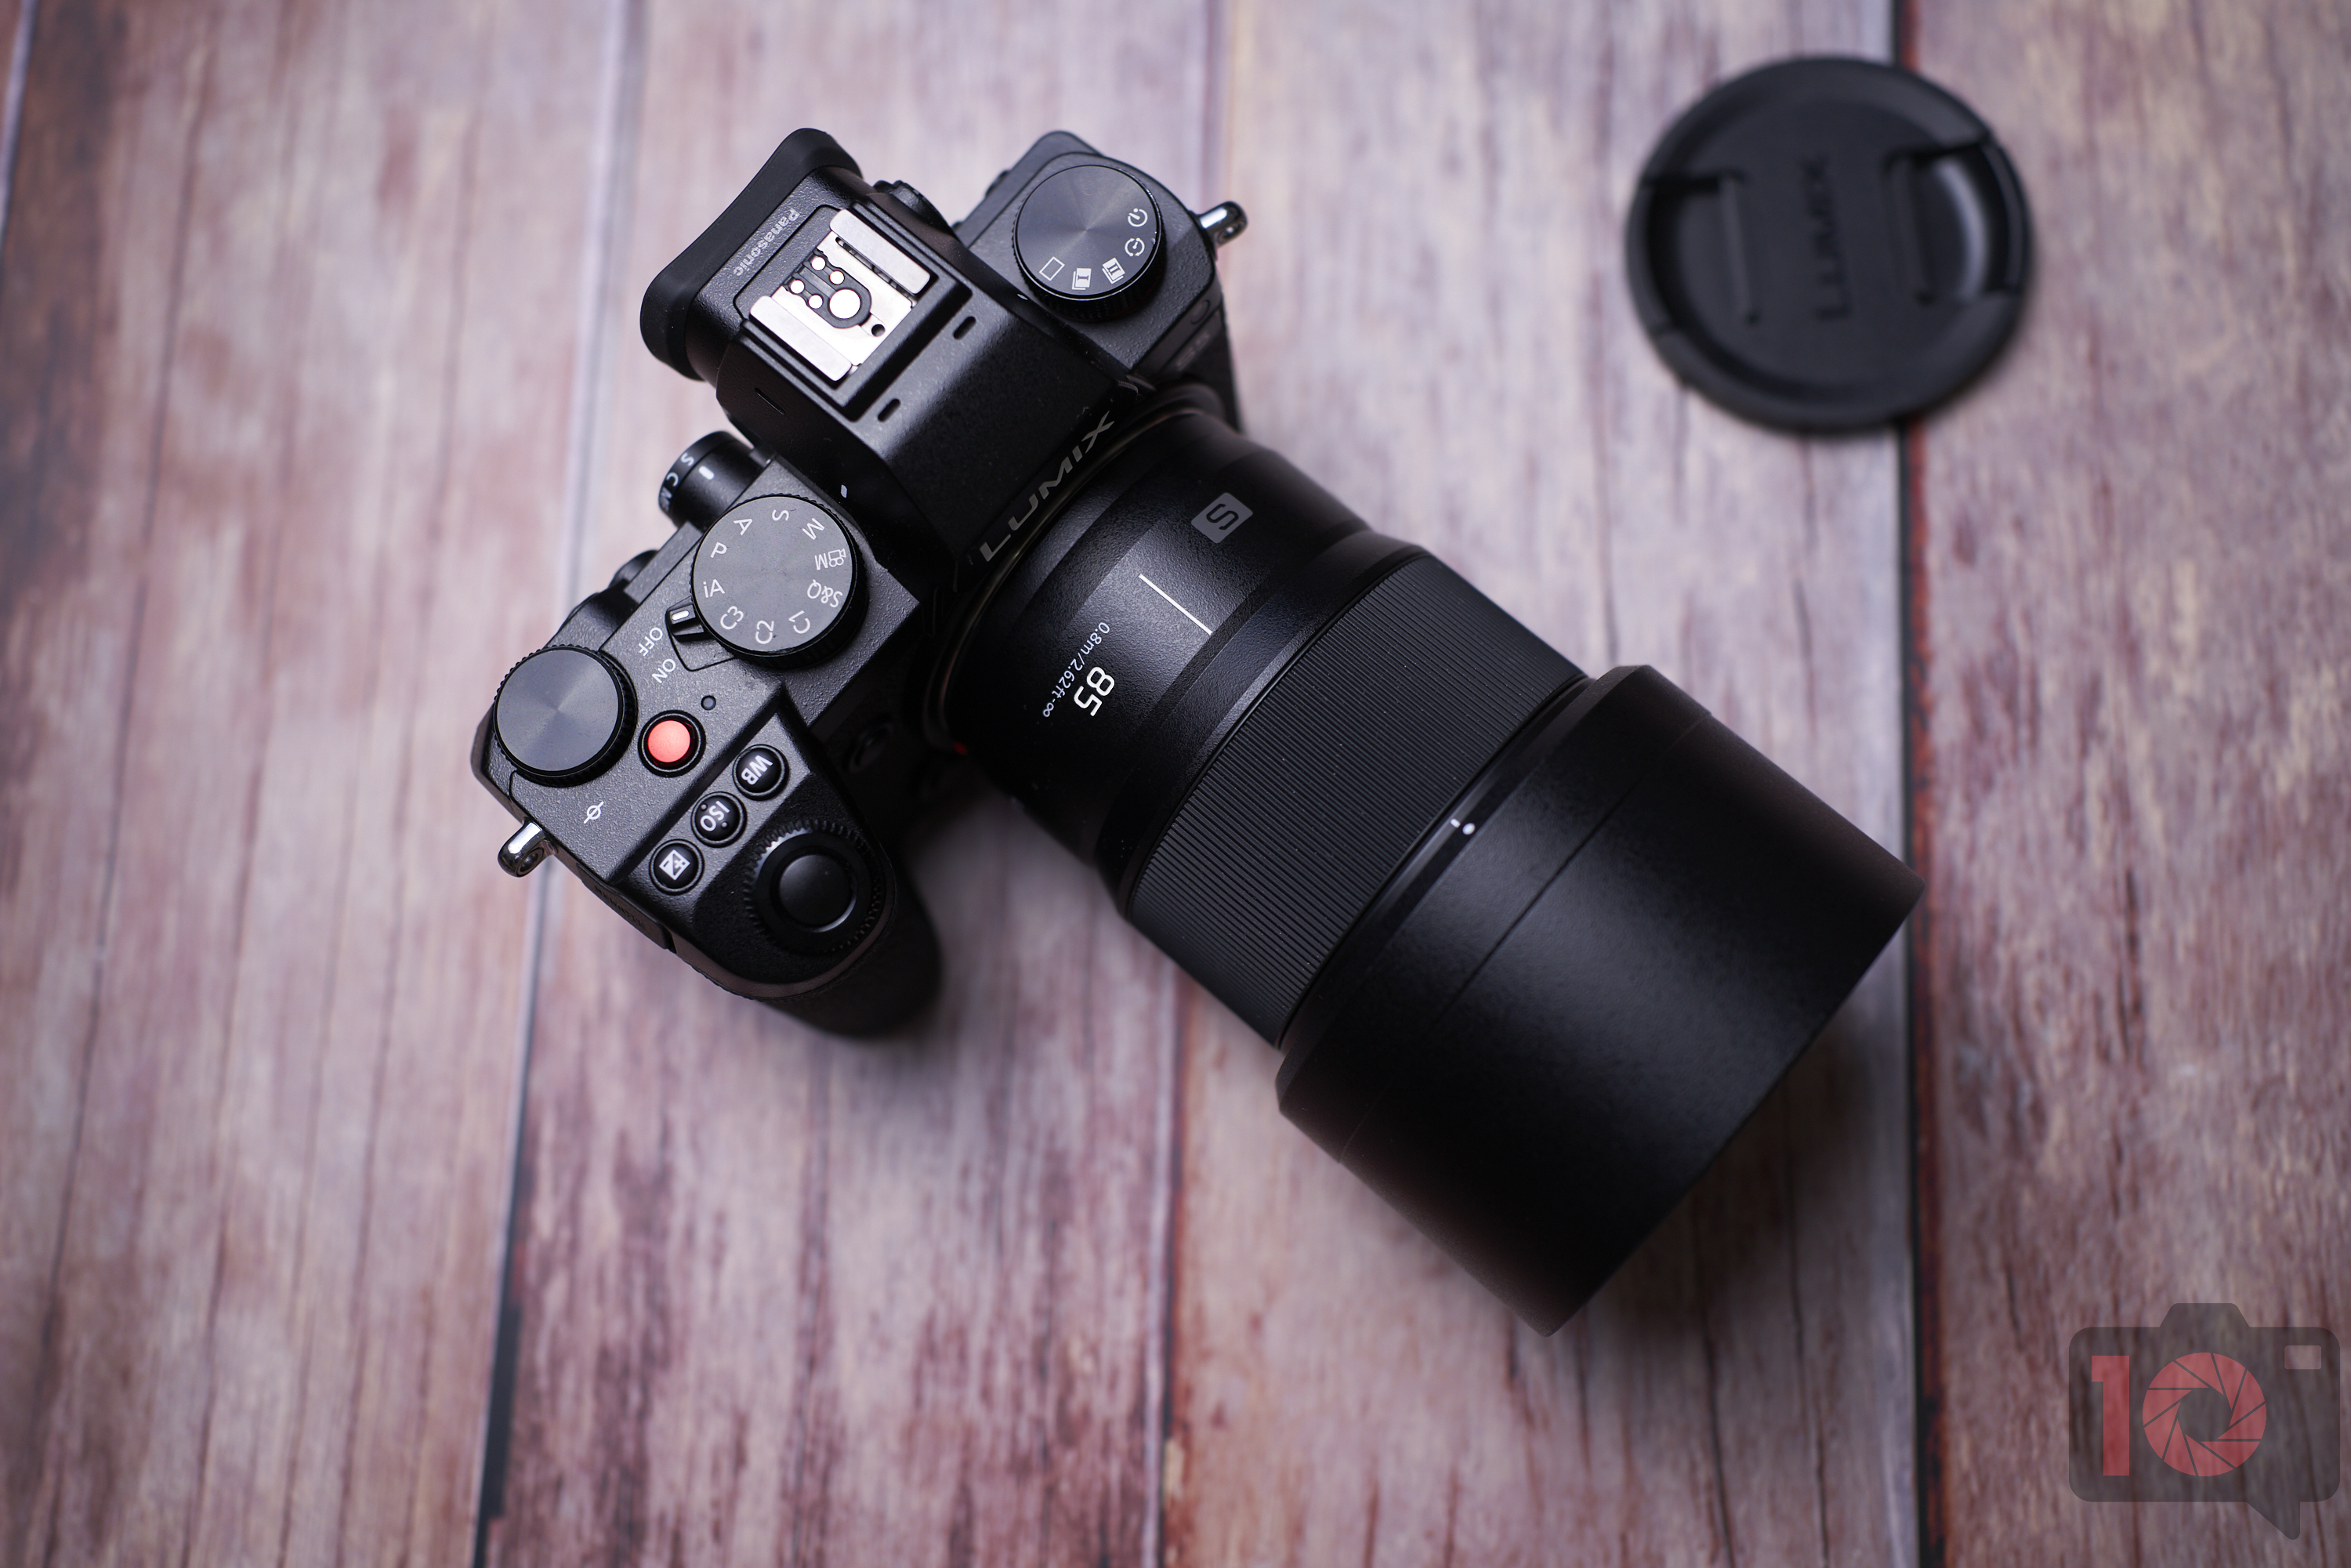 Chris Gampat The Phoblographer Panasonic 85mm f1.8 Review product images 2.81-200s200 1